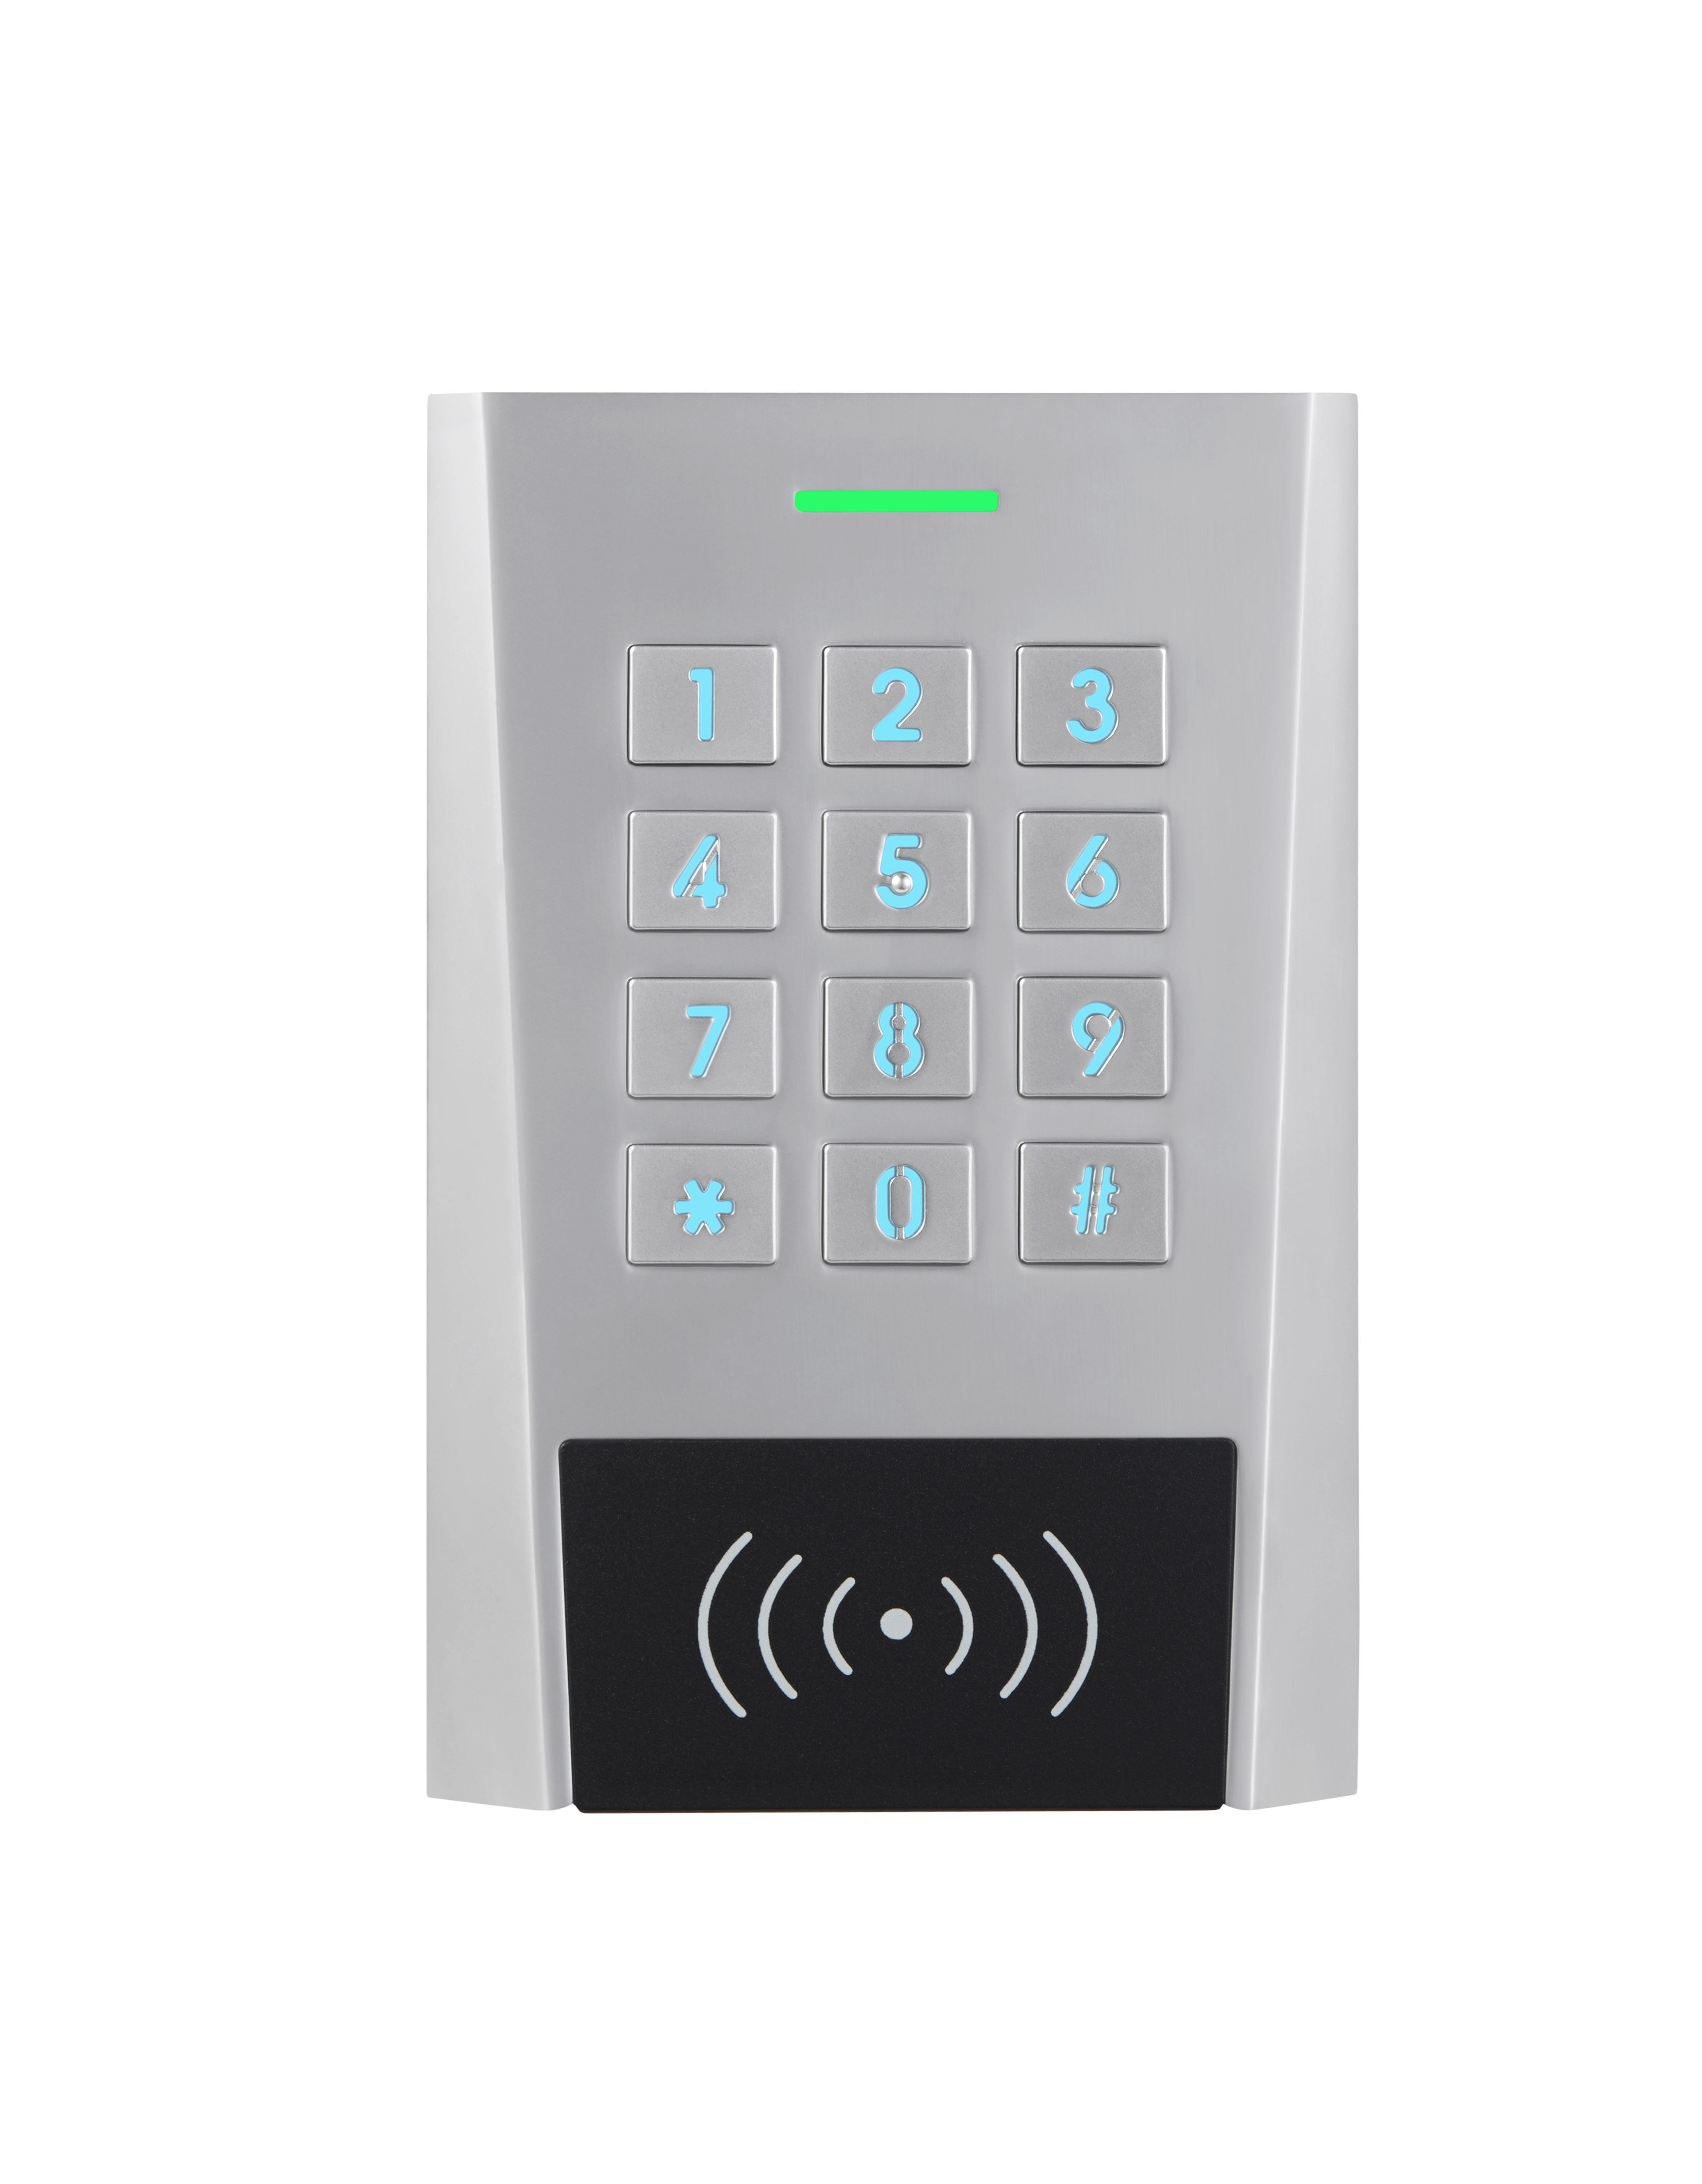 Waterproof Anti-vandal Metal Case Standalone Keypad Access Control,12~28V AC/DC Wide Voltage Door Entry Access Controller